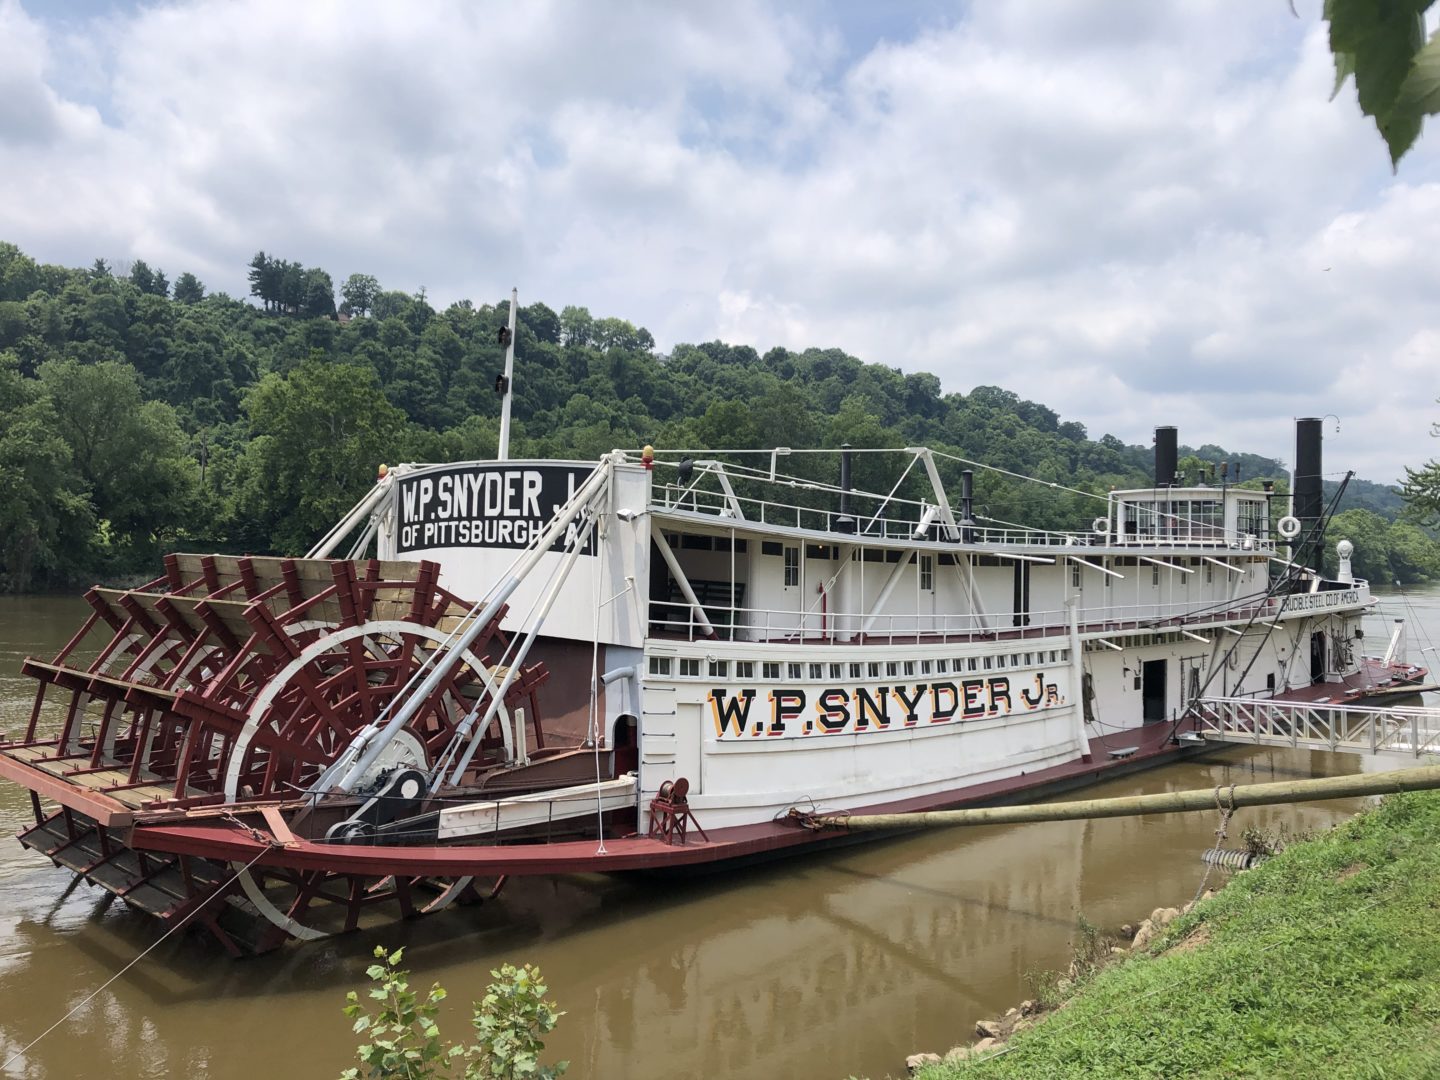 A landed shantyboat at Marietta’s Ohio River Museum A Secret History